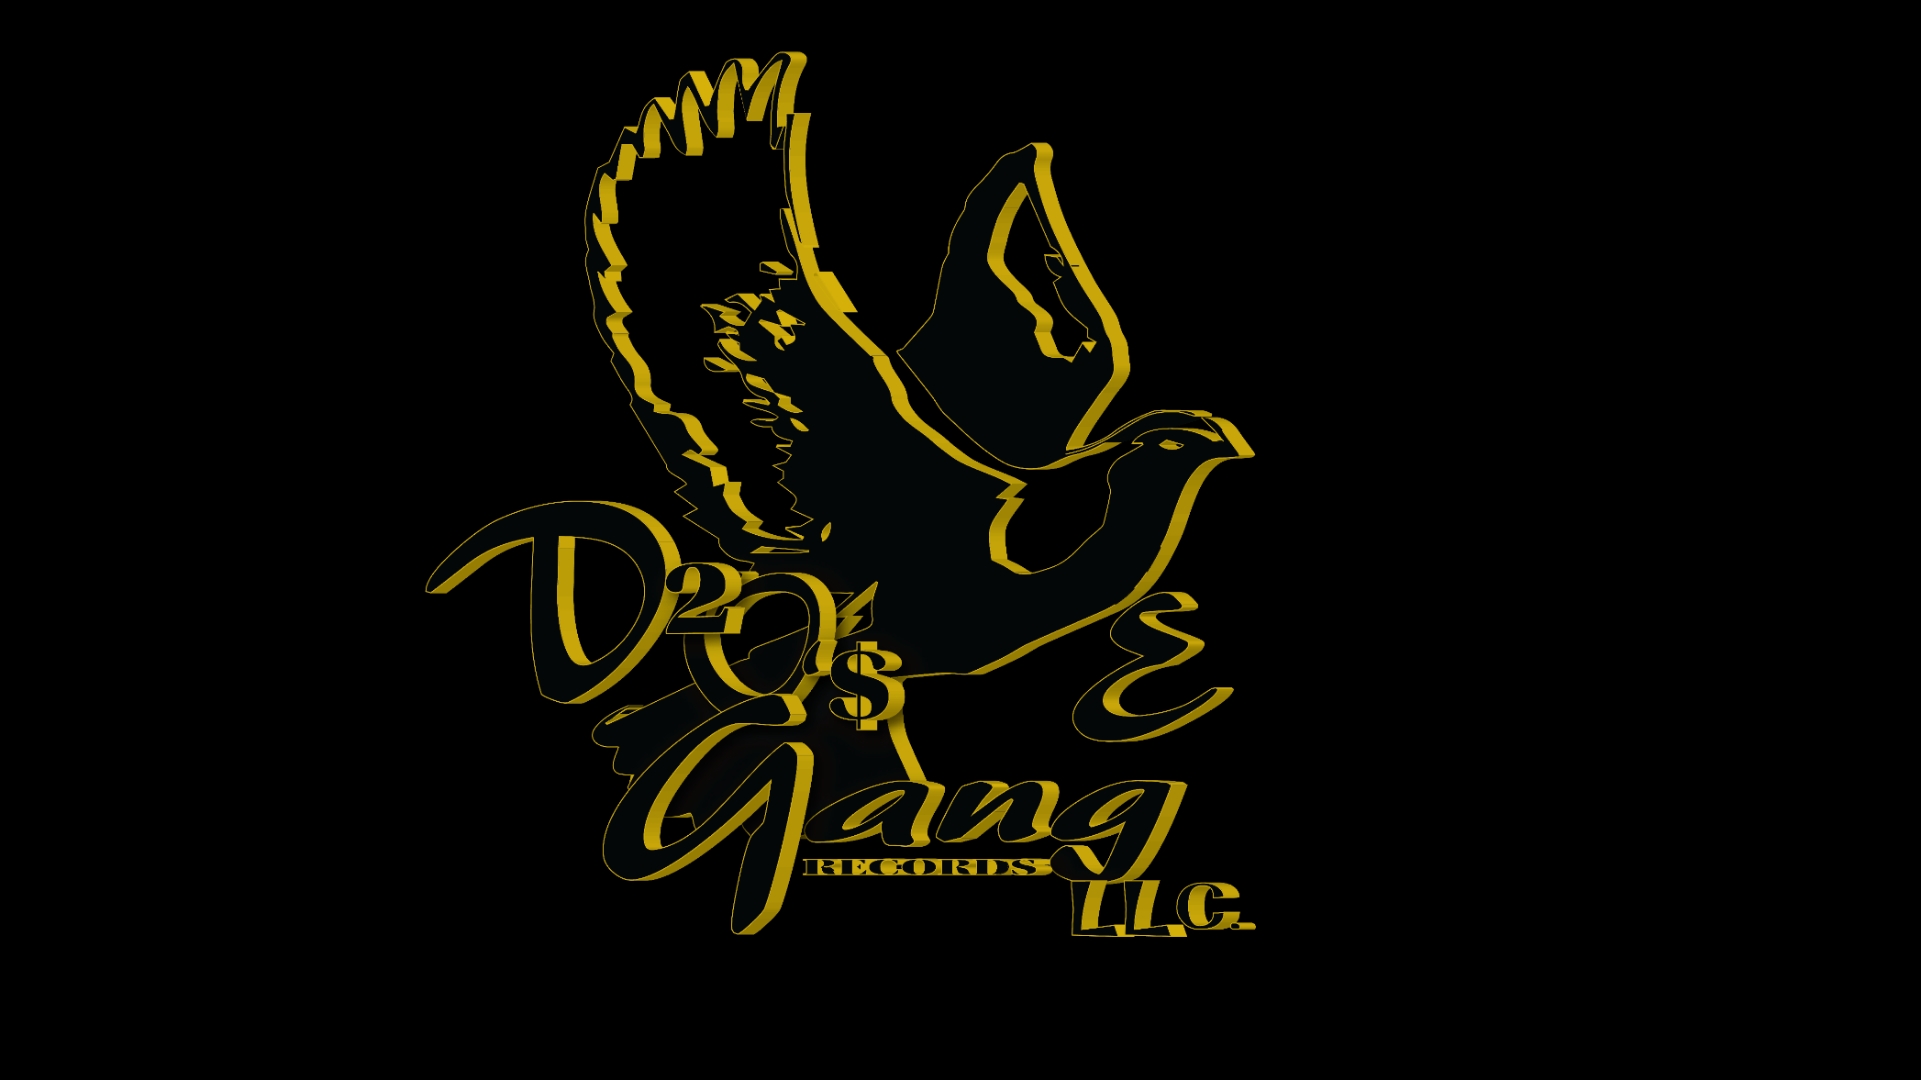 Get to know Dove Gang Records LLC